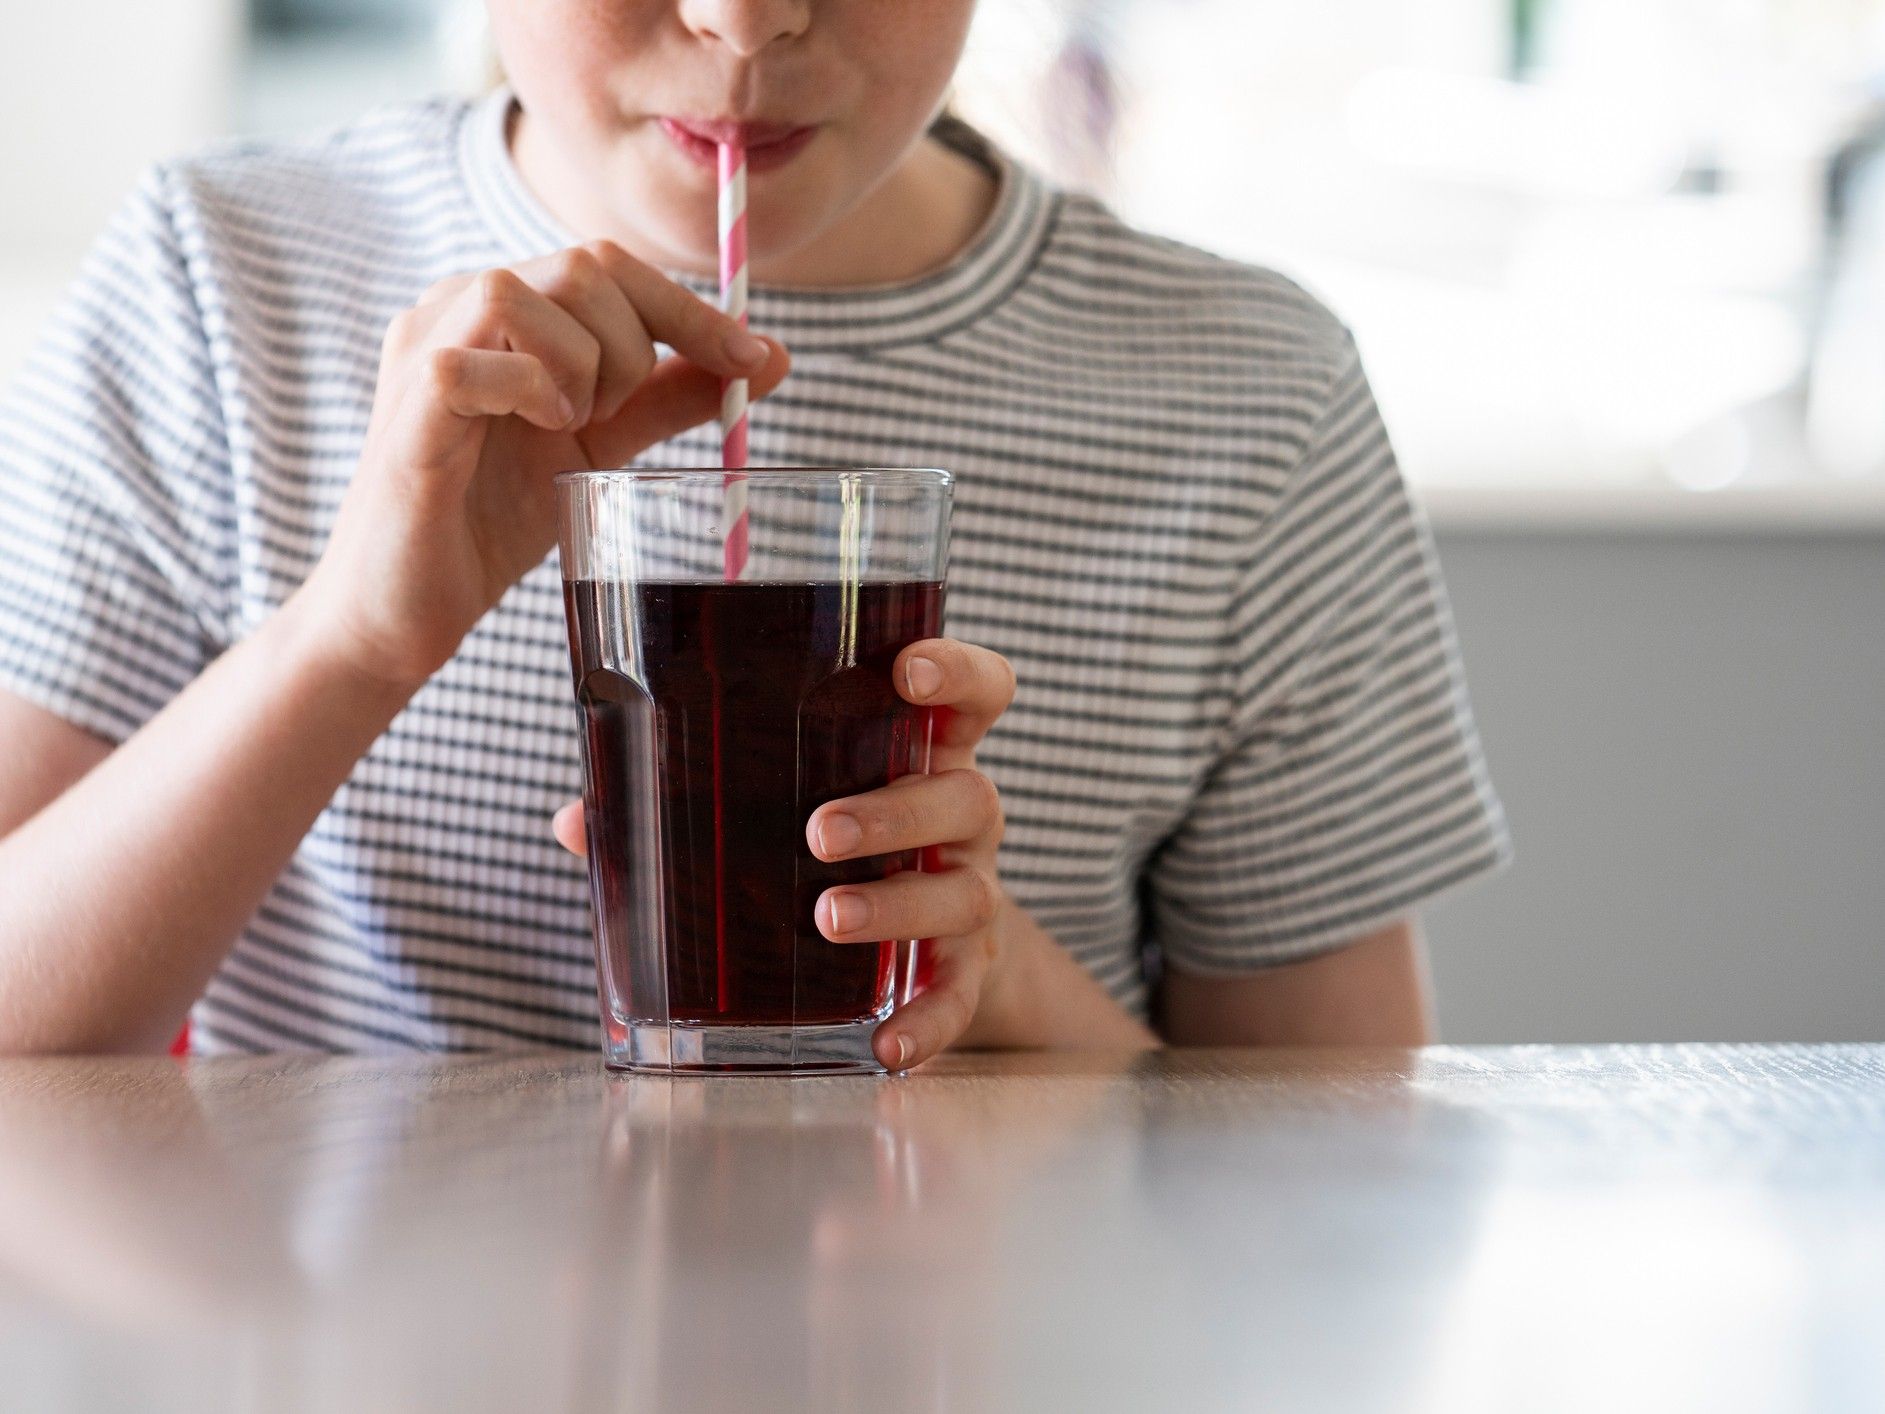 Once you get in the habit of drinking soda, it can be really hard to stop. GETTY